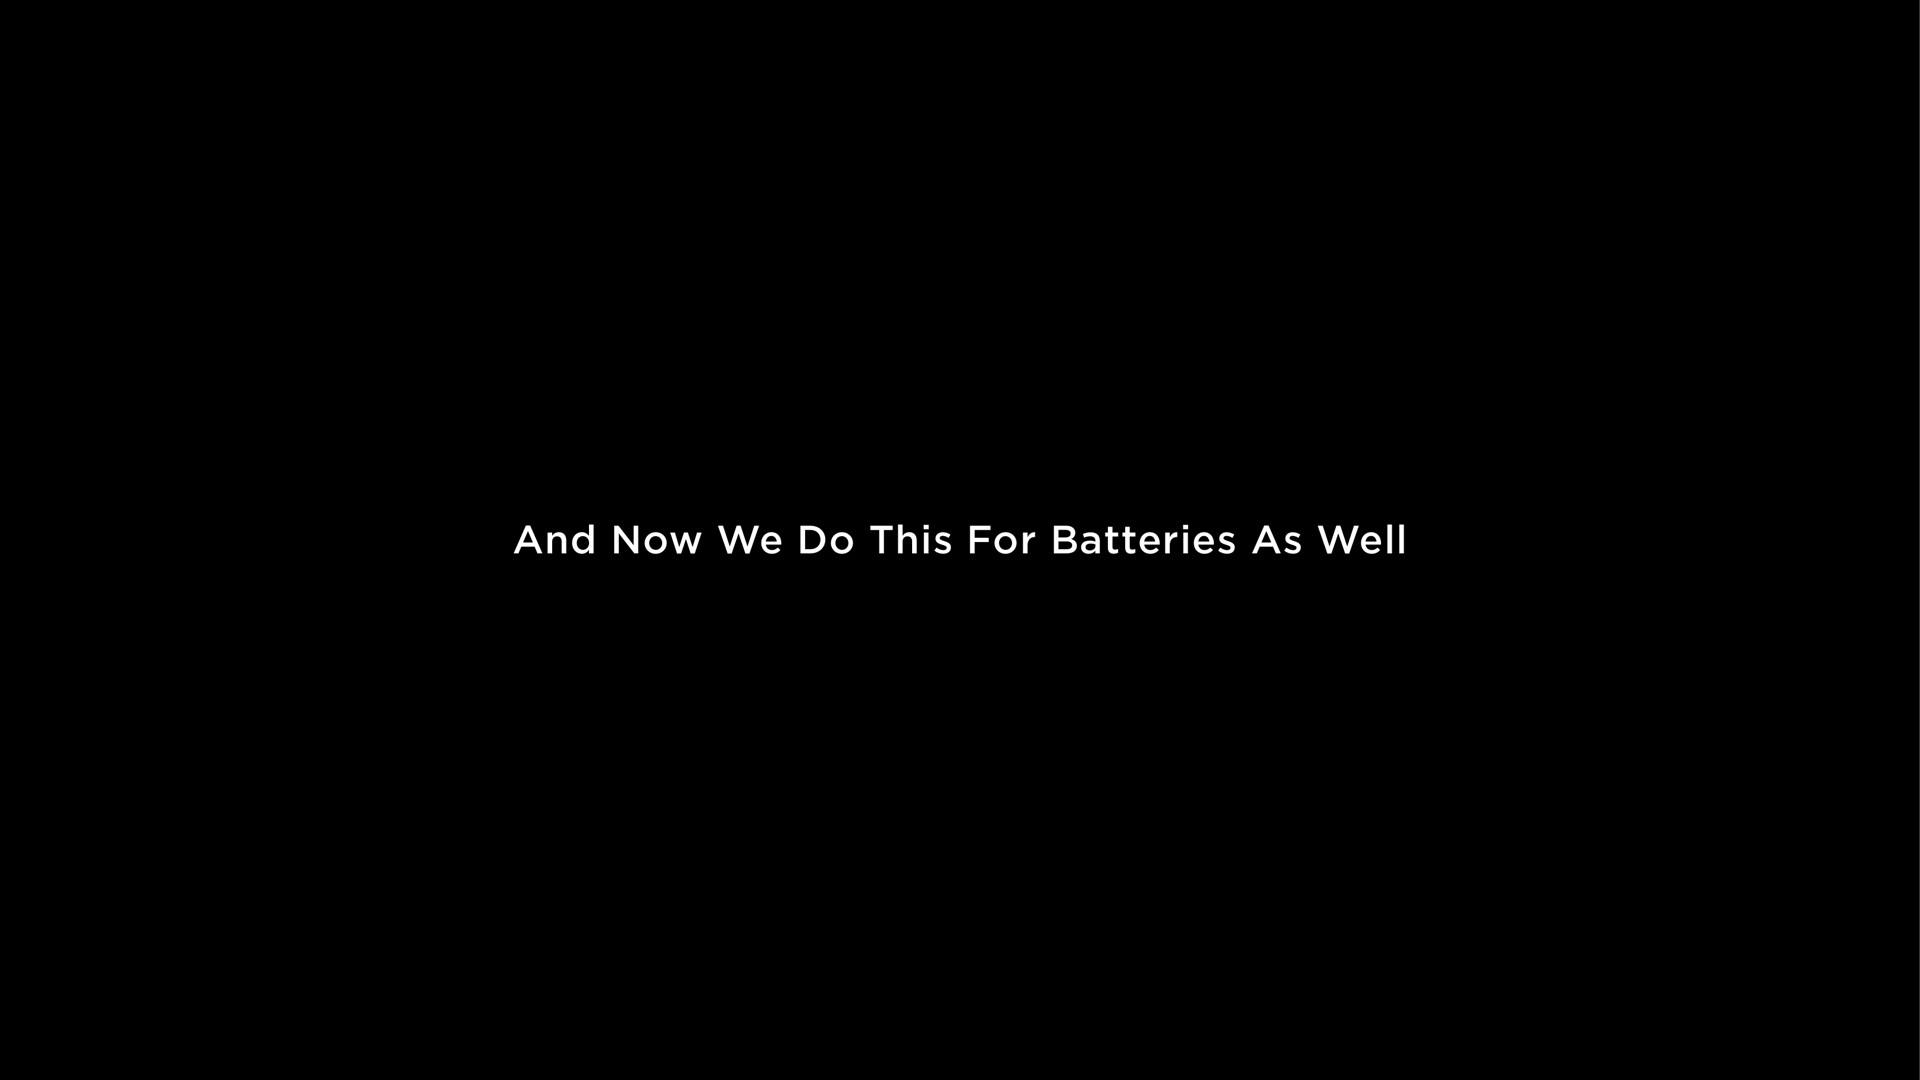 and now we do this for batteries as well | Tesla